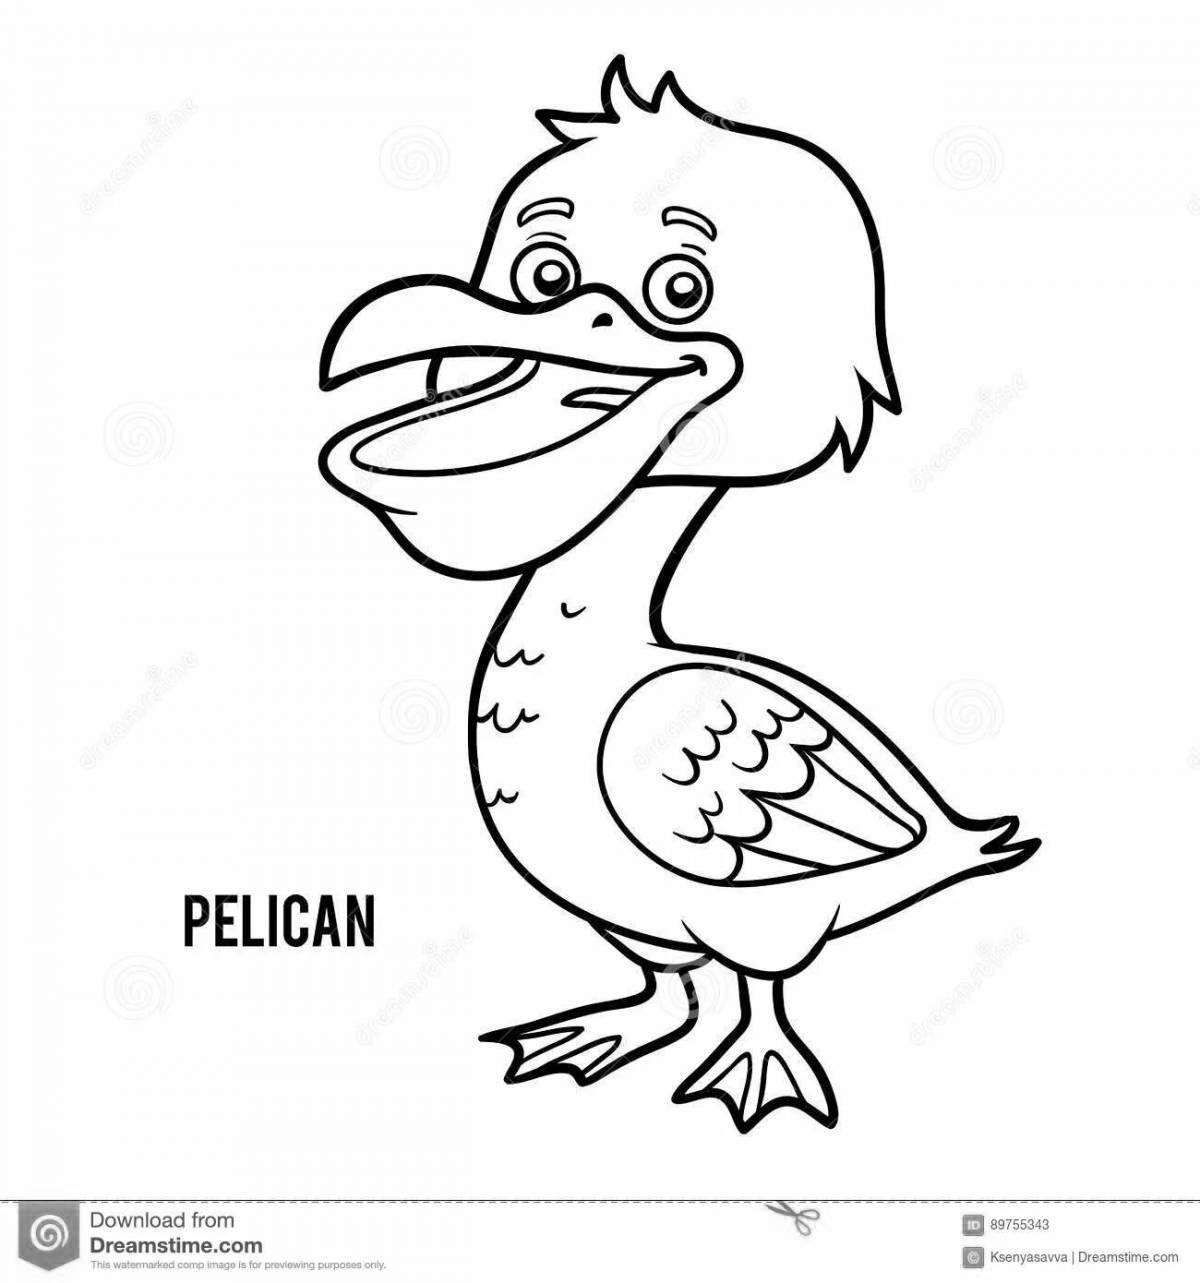 Gorgeous pelican coloring for students